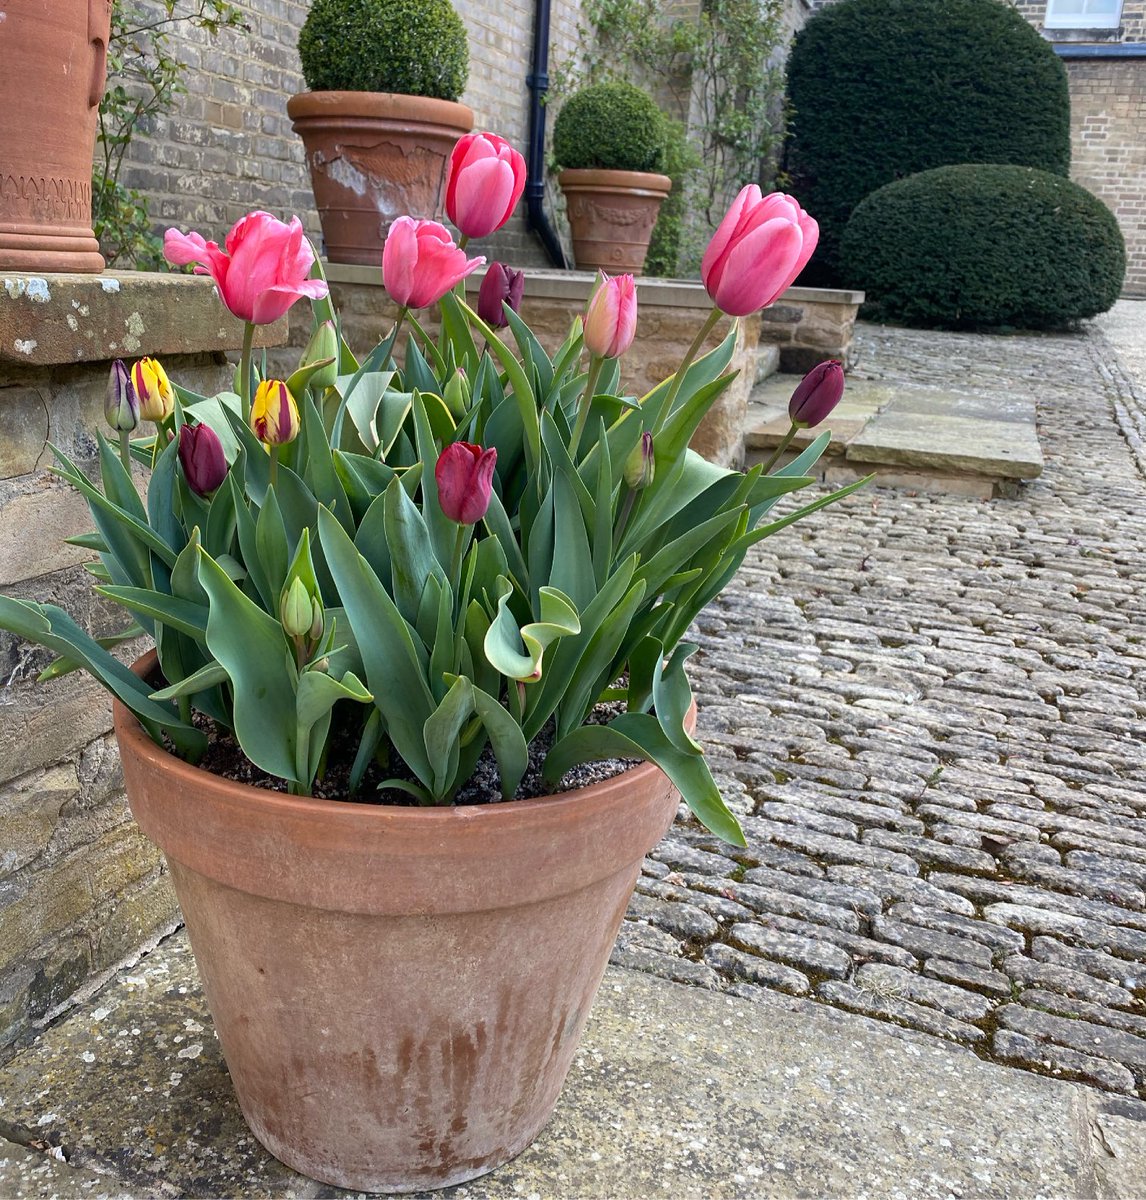 Tulips at ⁦@AlthorpHouse⁩ - inside and out.